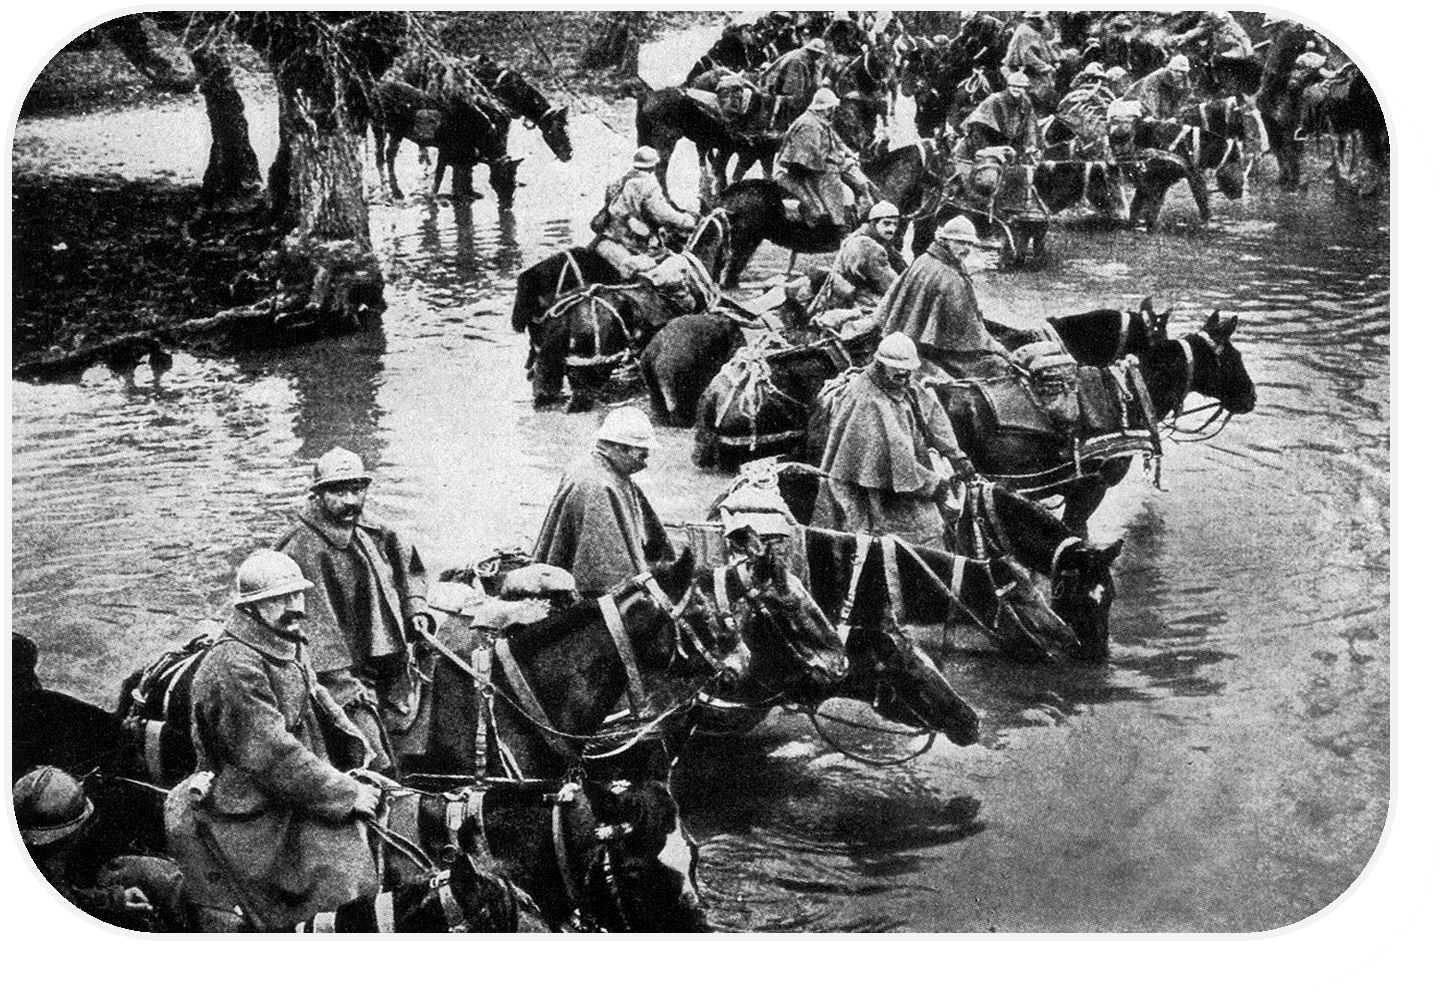 French train horses resting in a river on their way to Verdun 